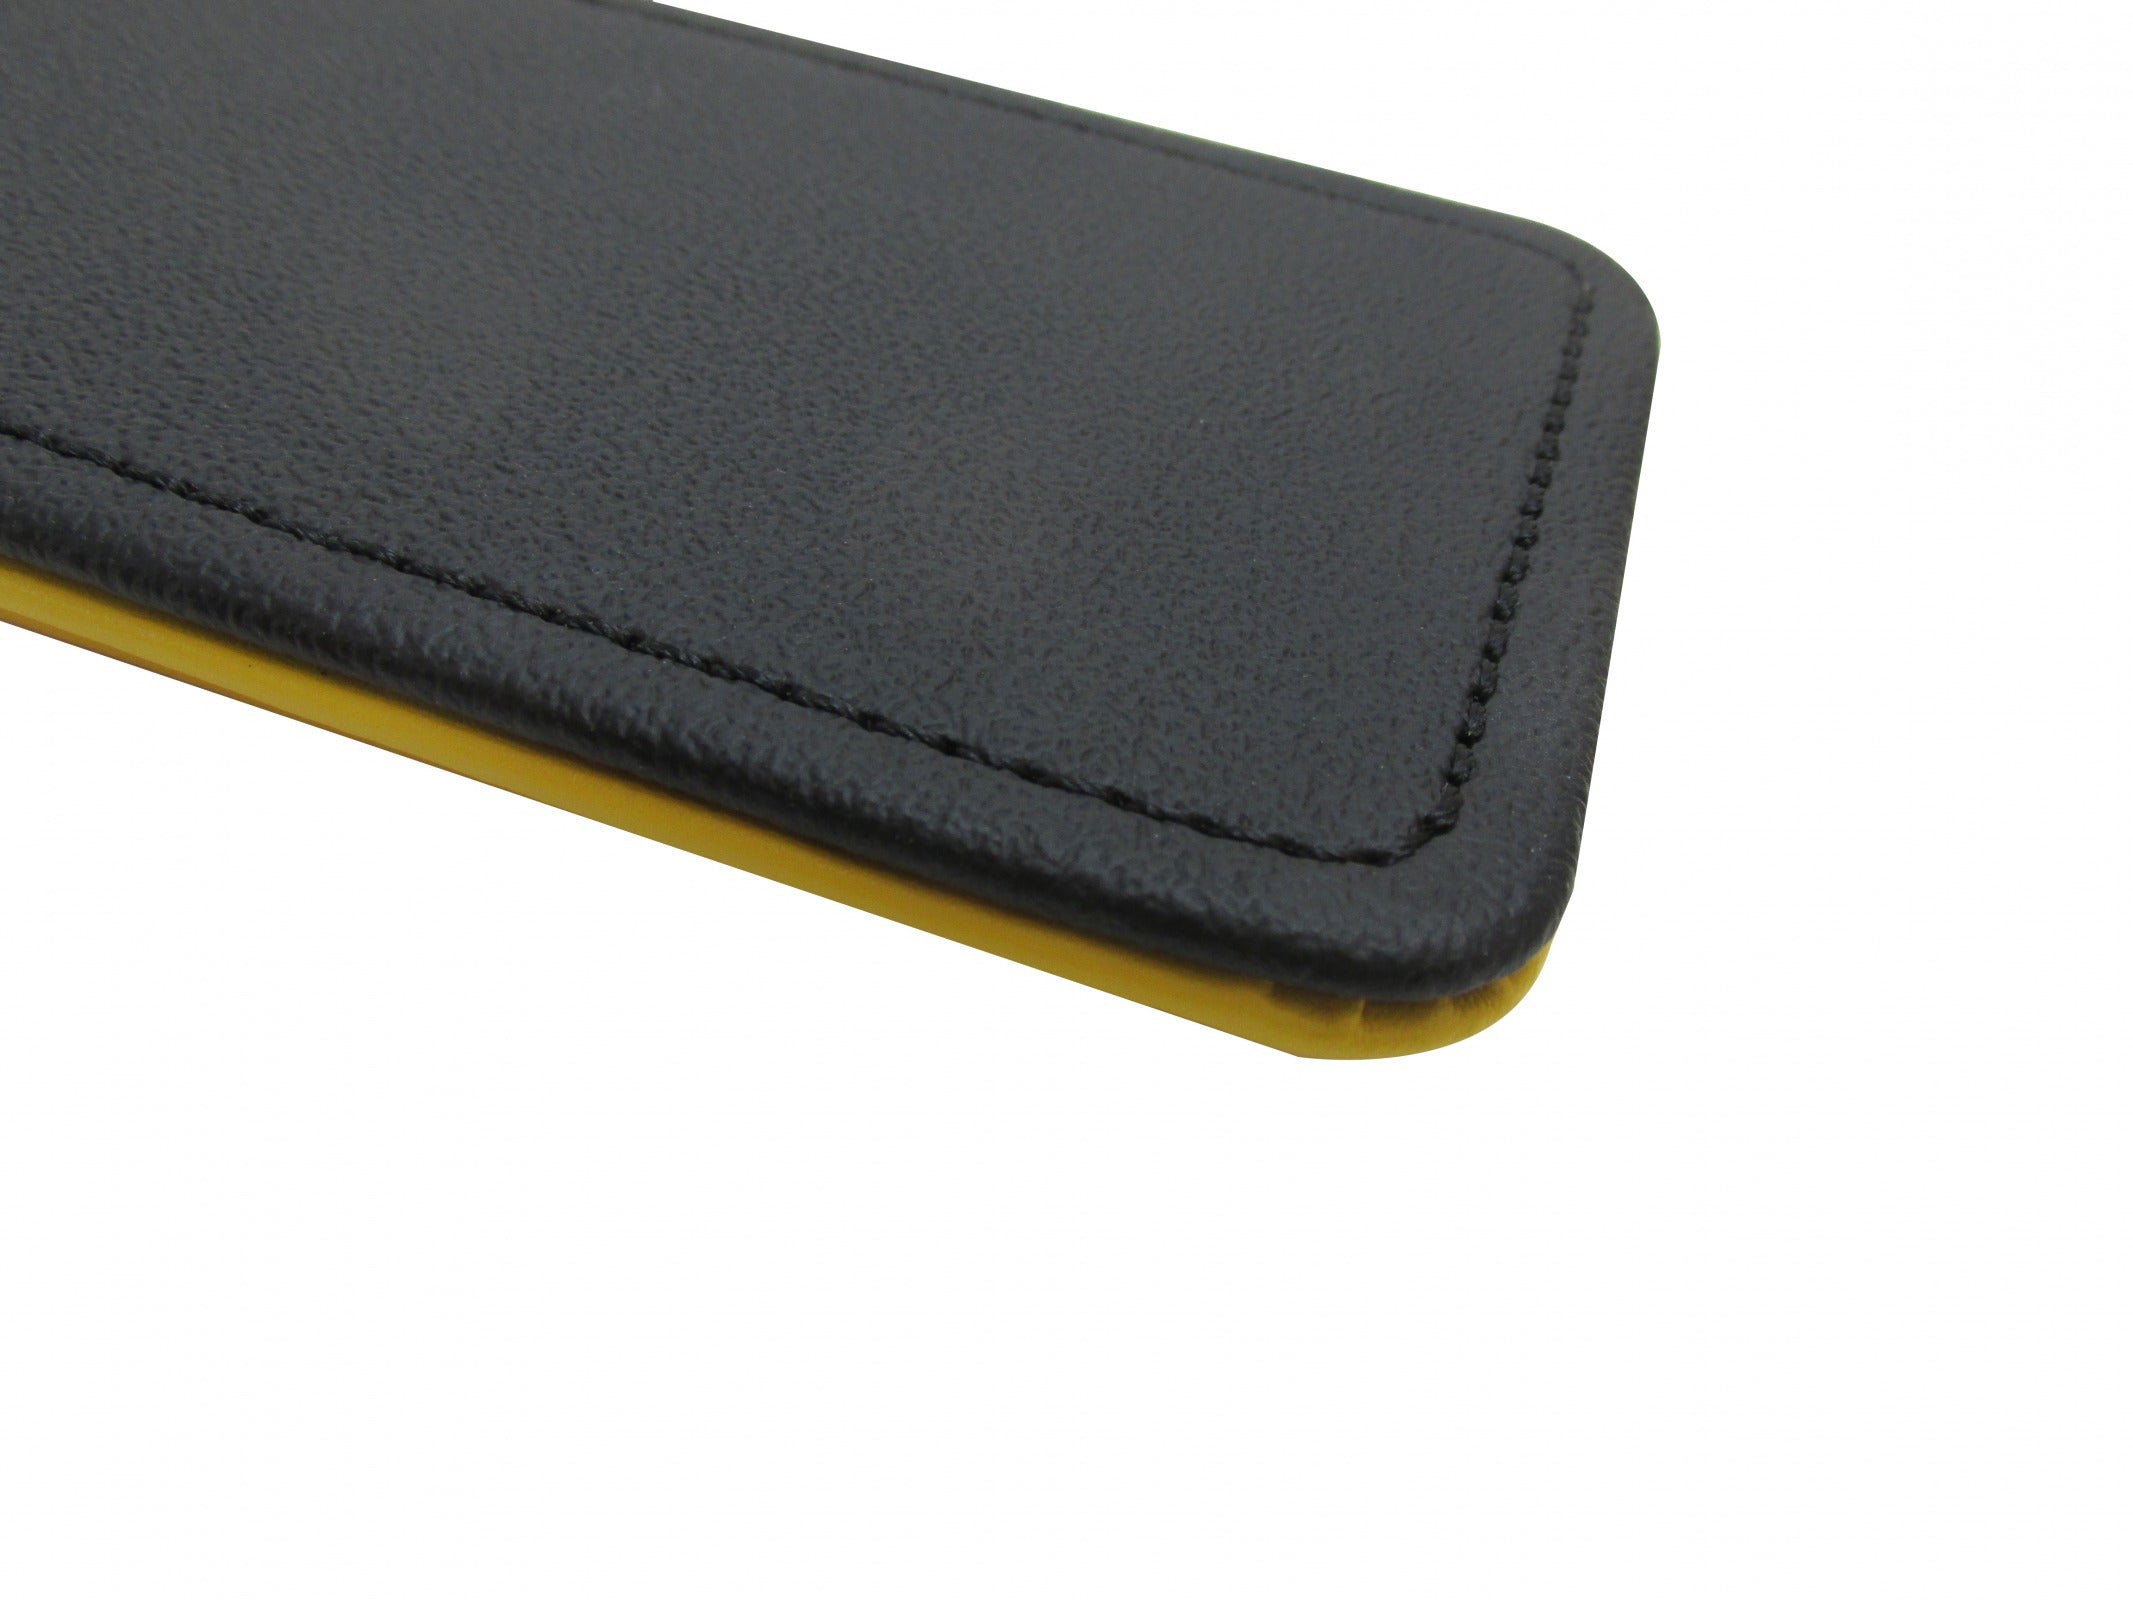 MK Honey Bee Compact 60% Wrist Rest Yellow Leather w/ Black Stitching MKWGTTRVH9 |41988|